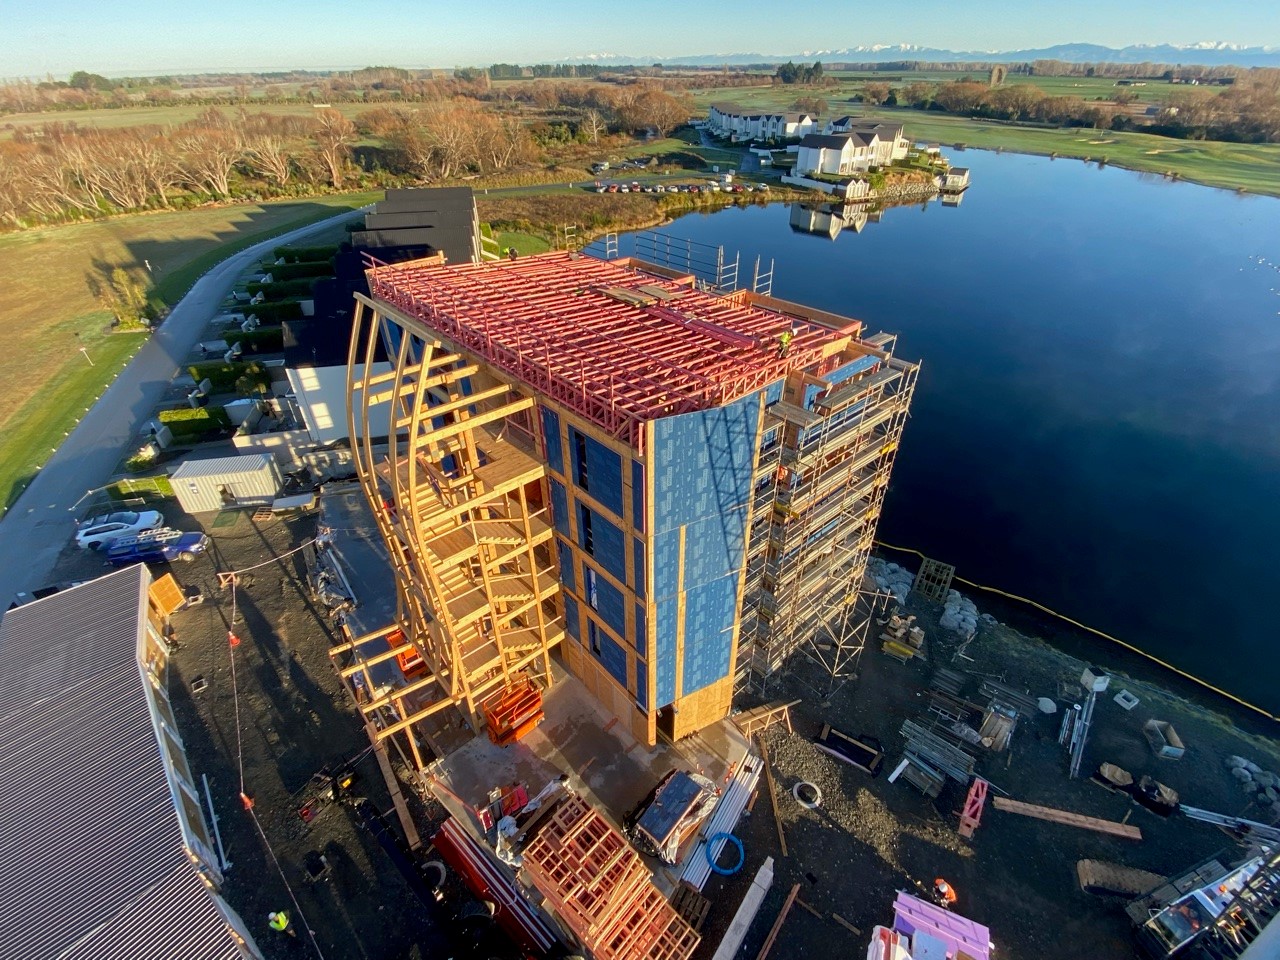 Image of a wooden midrise building under construction next to a small man-made lake.